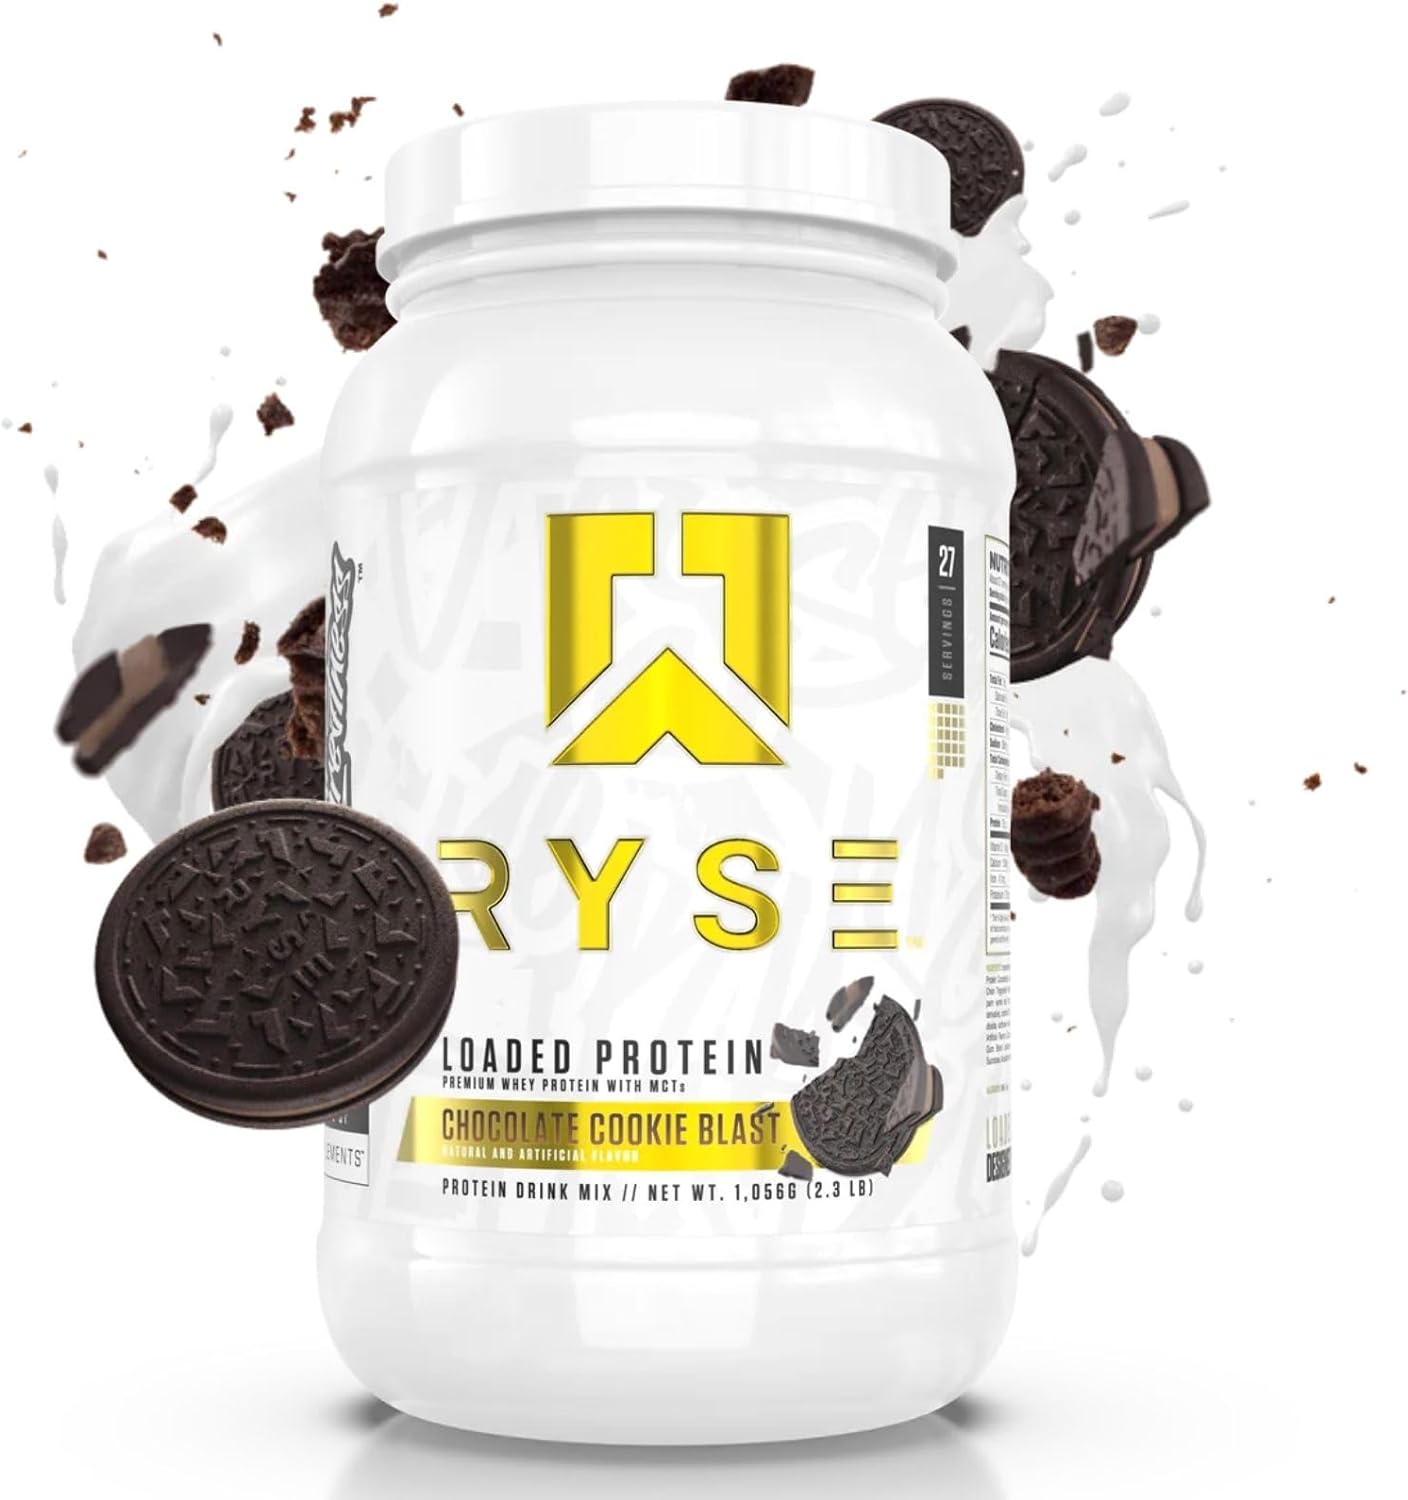 RYSE Up Supplements Loaded Protein Powder | 25g Whey Protein Isolate & Concentrate | with Prebiotic Fiber & MCTs | Low Carbs & Low Sugar | 27 Servings (Chocolate Cookie Blast)